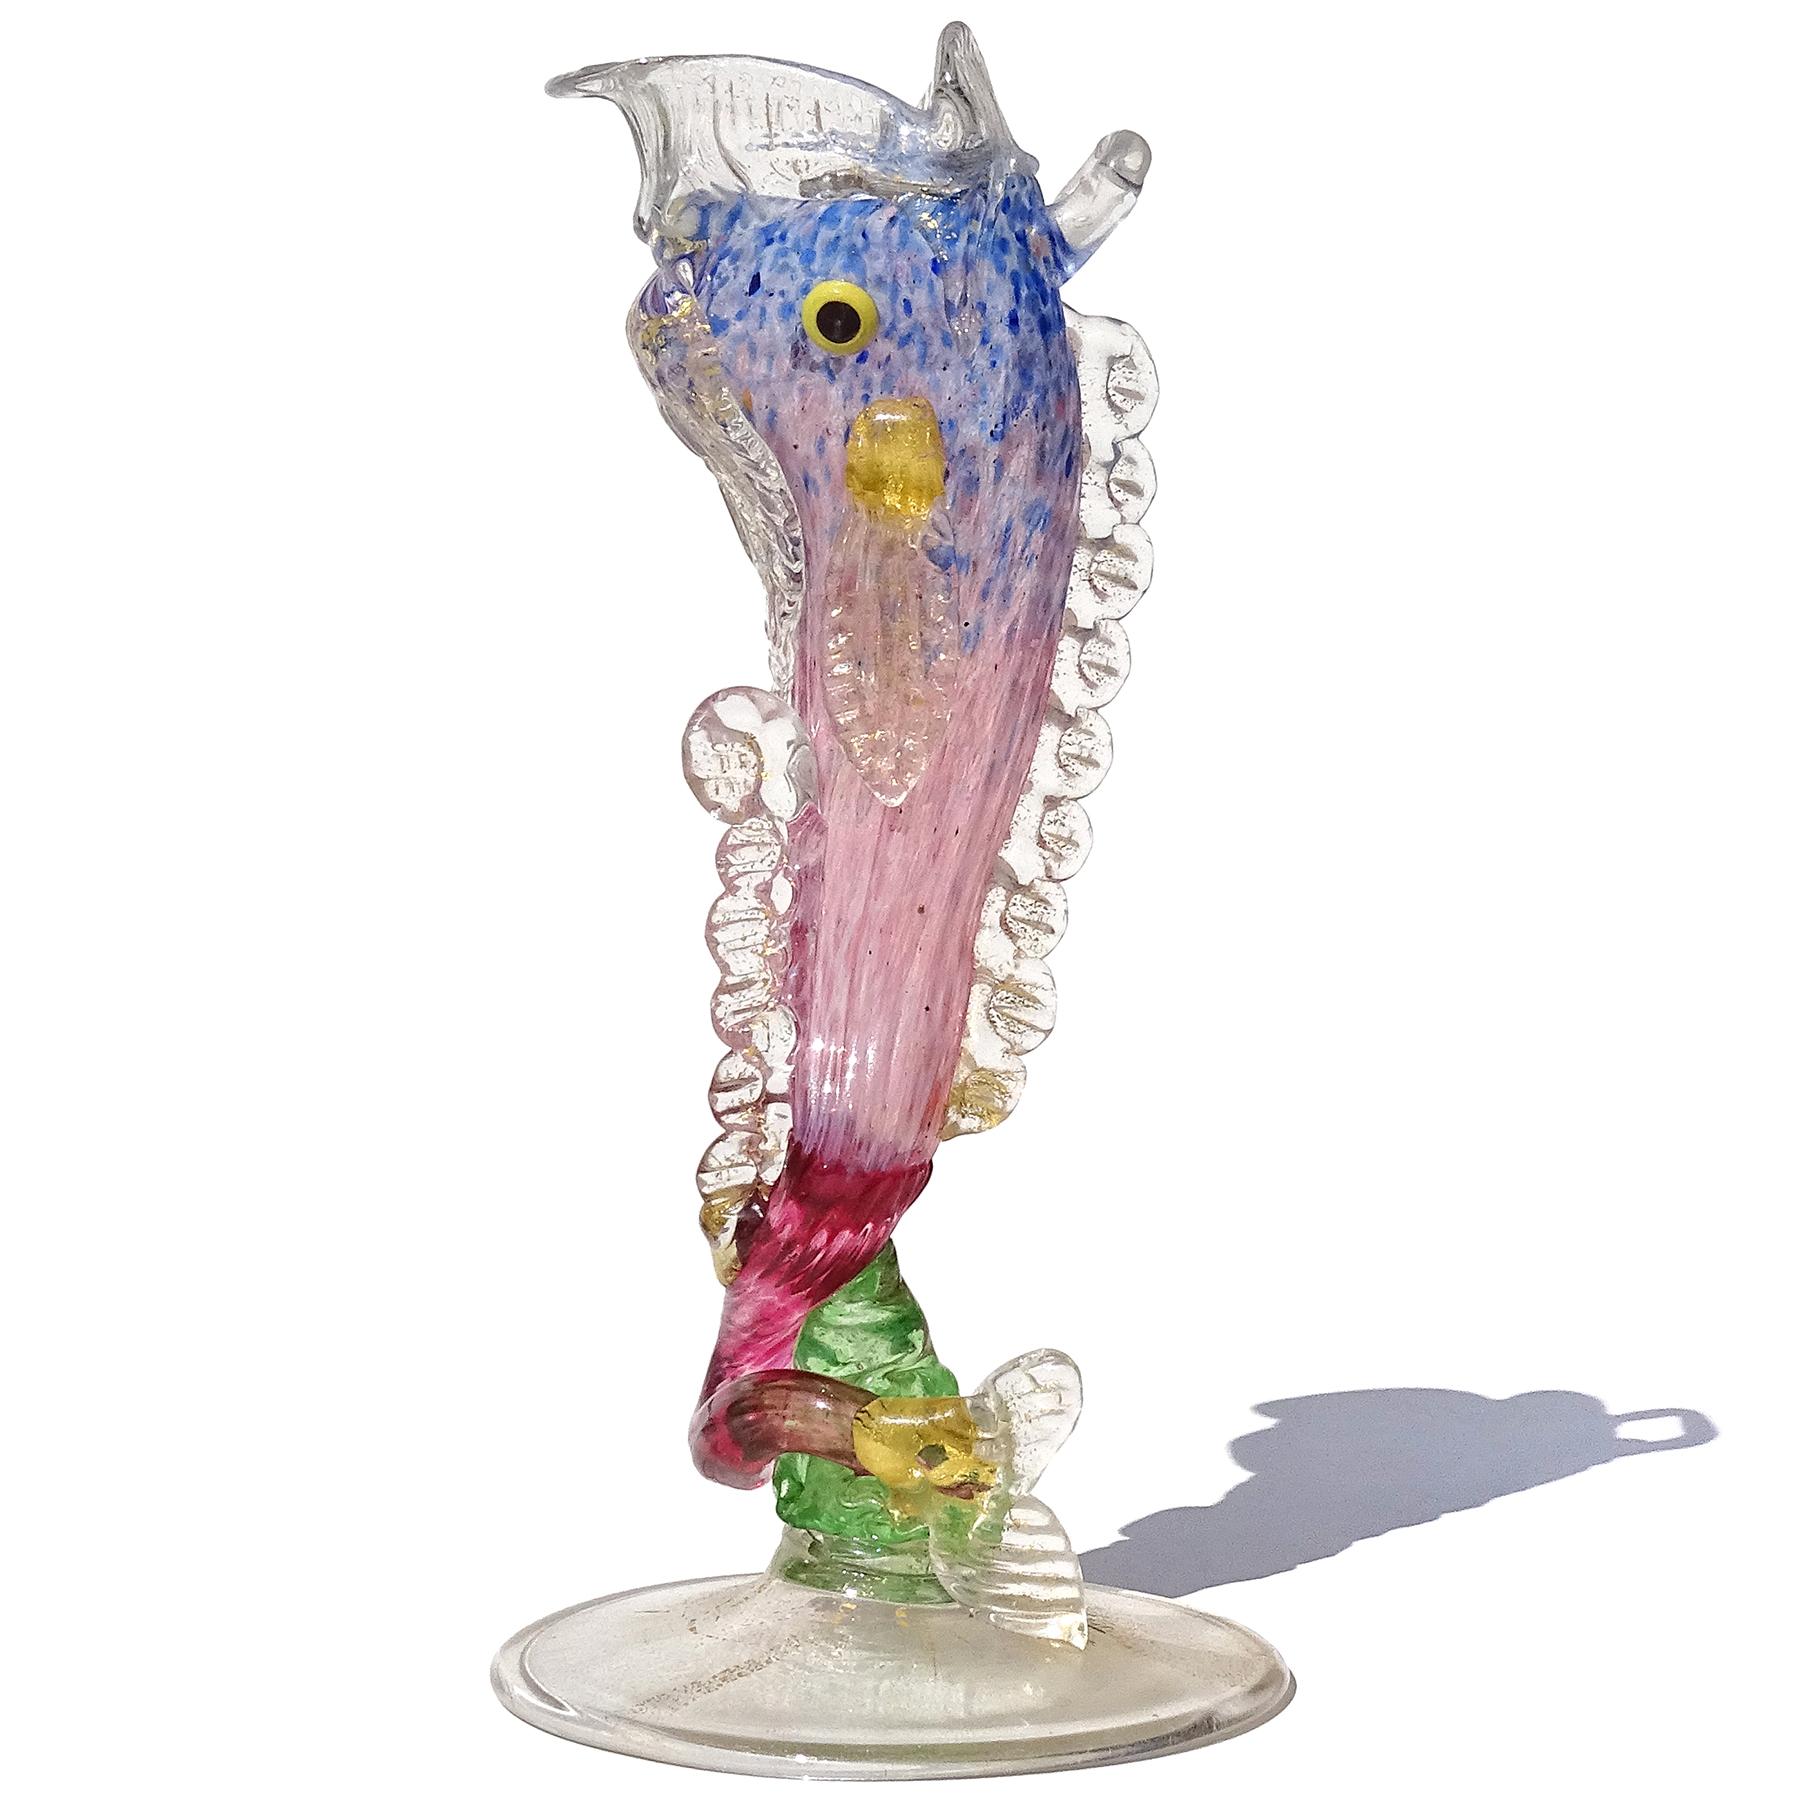 Beautiful, antique, early Venetian / Murano hand blown blue to pink and gold flecks Italian art glass with ornate fish shaped flower vase / table object. Created in the manner of the Salviati and Fratelli Toso companies, with similars dated from